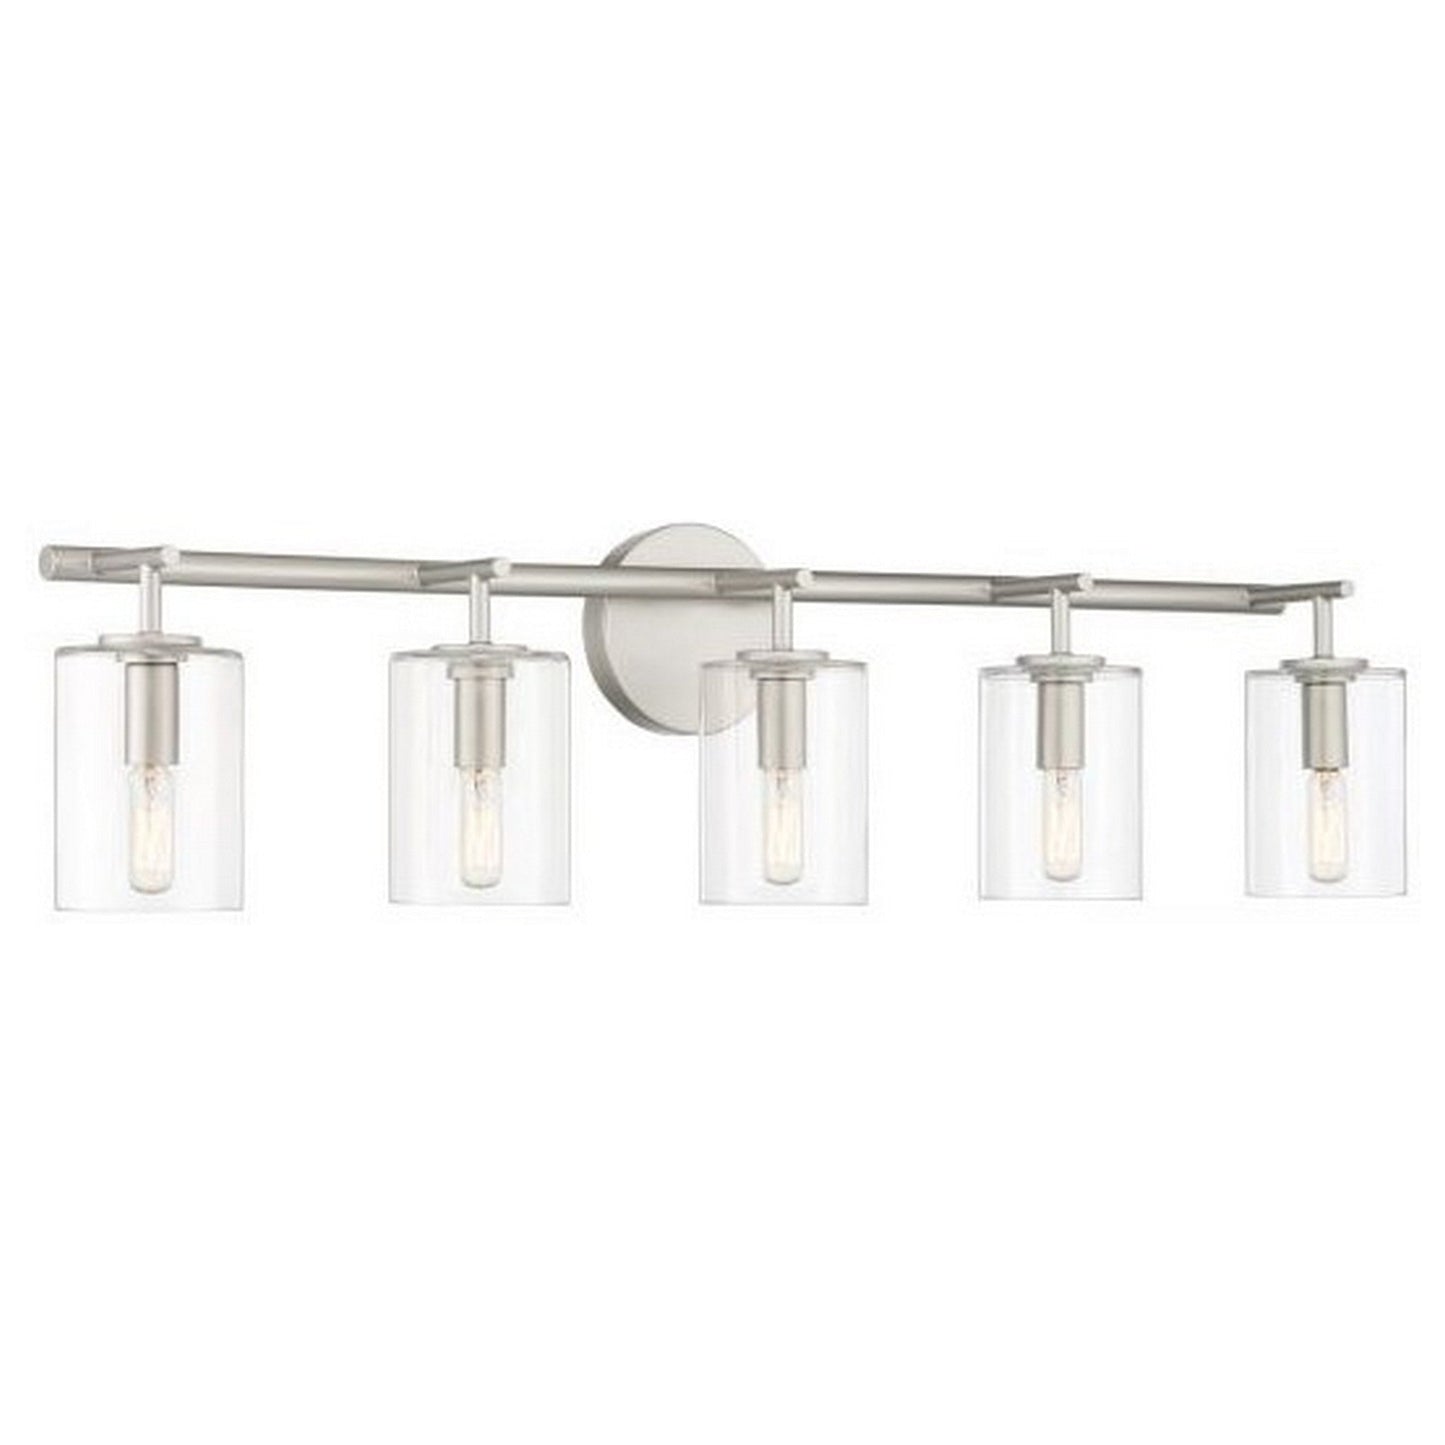 Craftmade Hailie 35" 5-Light Satin Nickel Vanity Light With Clear Glass Cylinder Shades